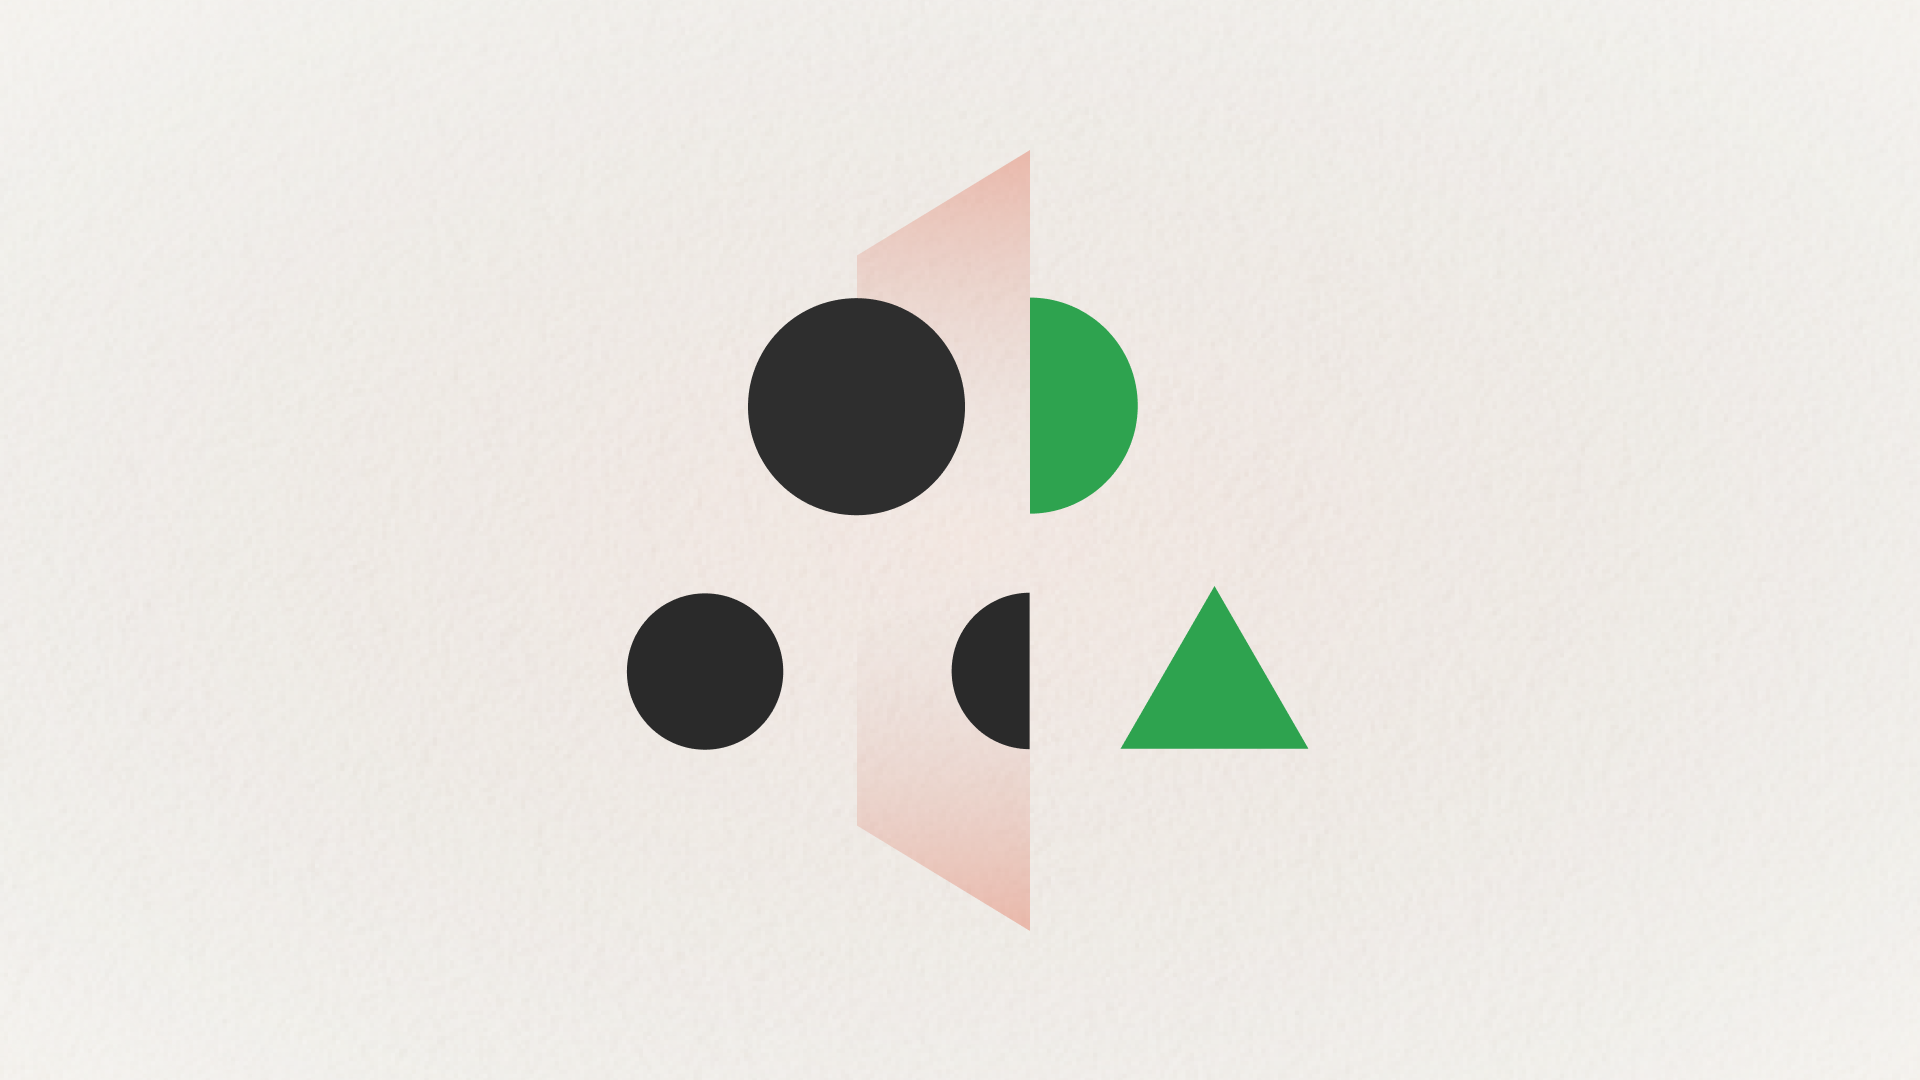 Abstract illustration of black and green shapes next to a mirror.